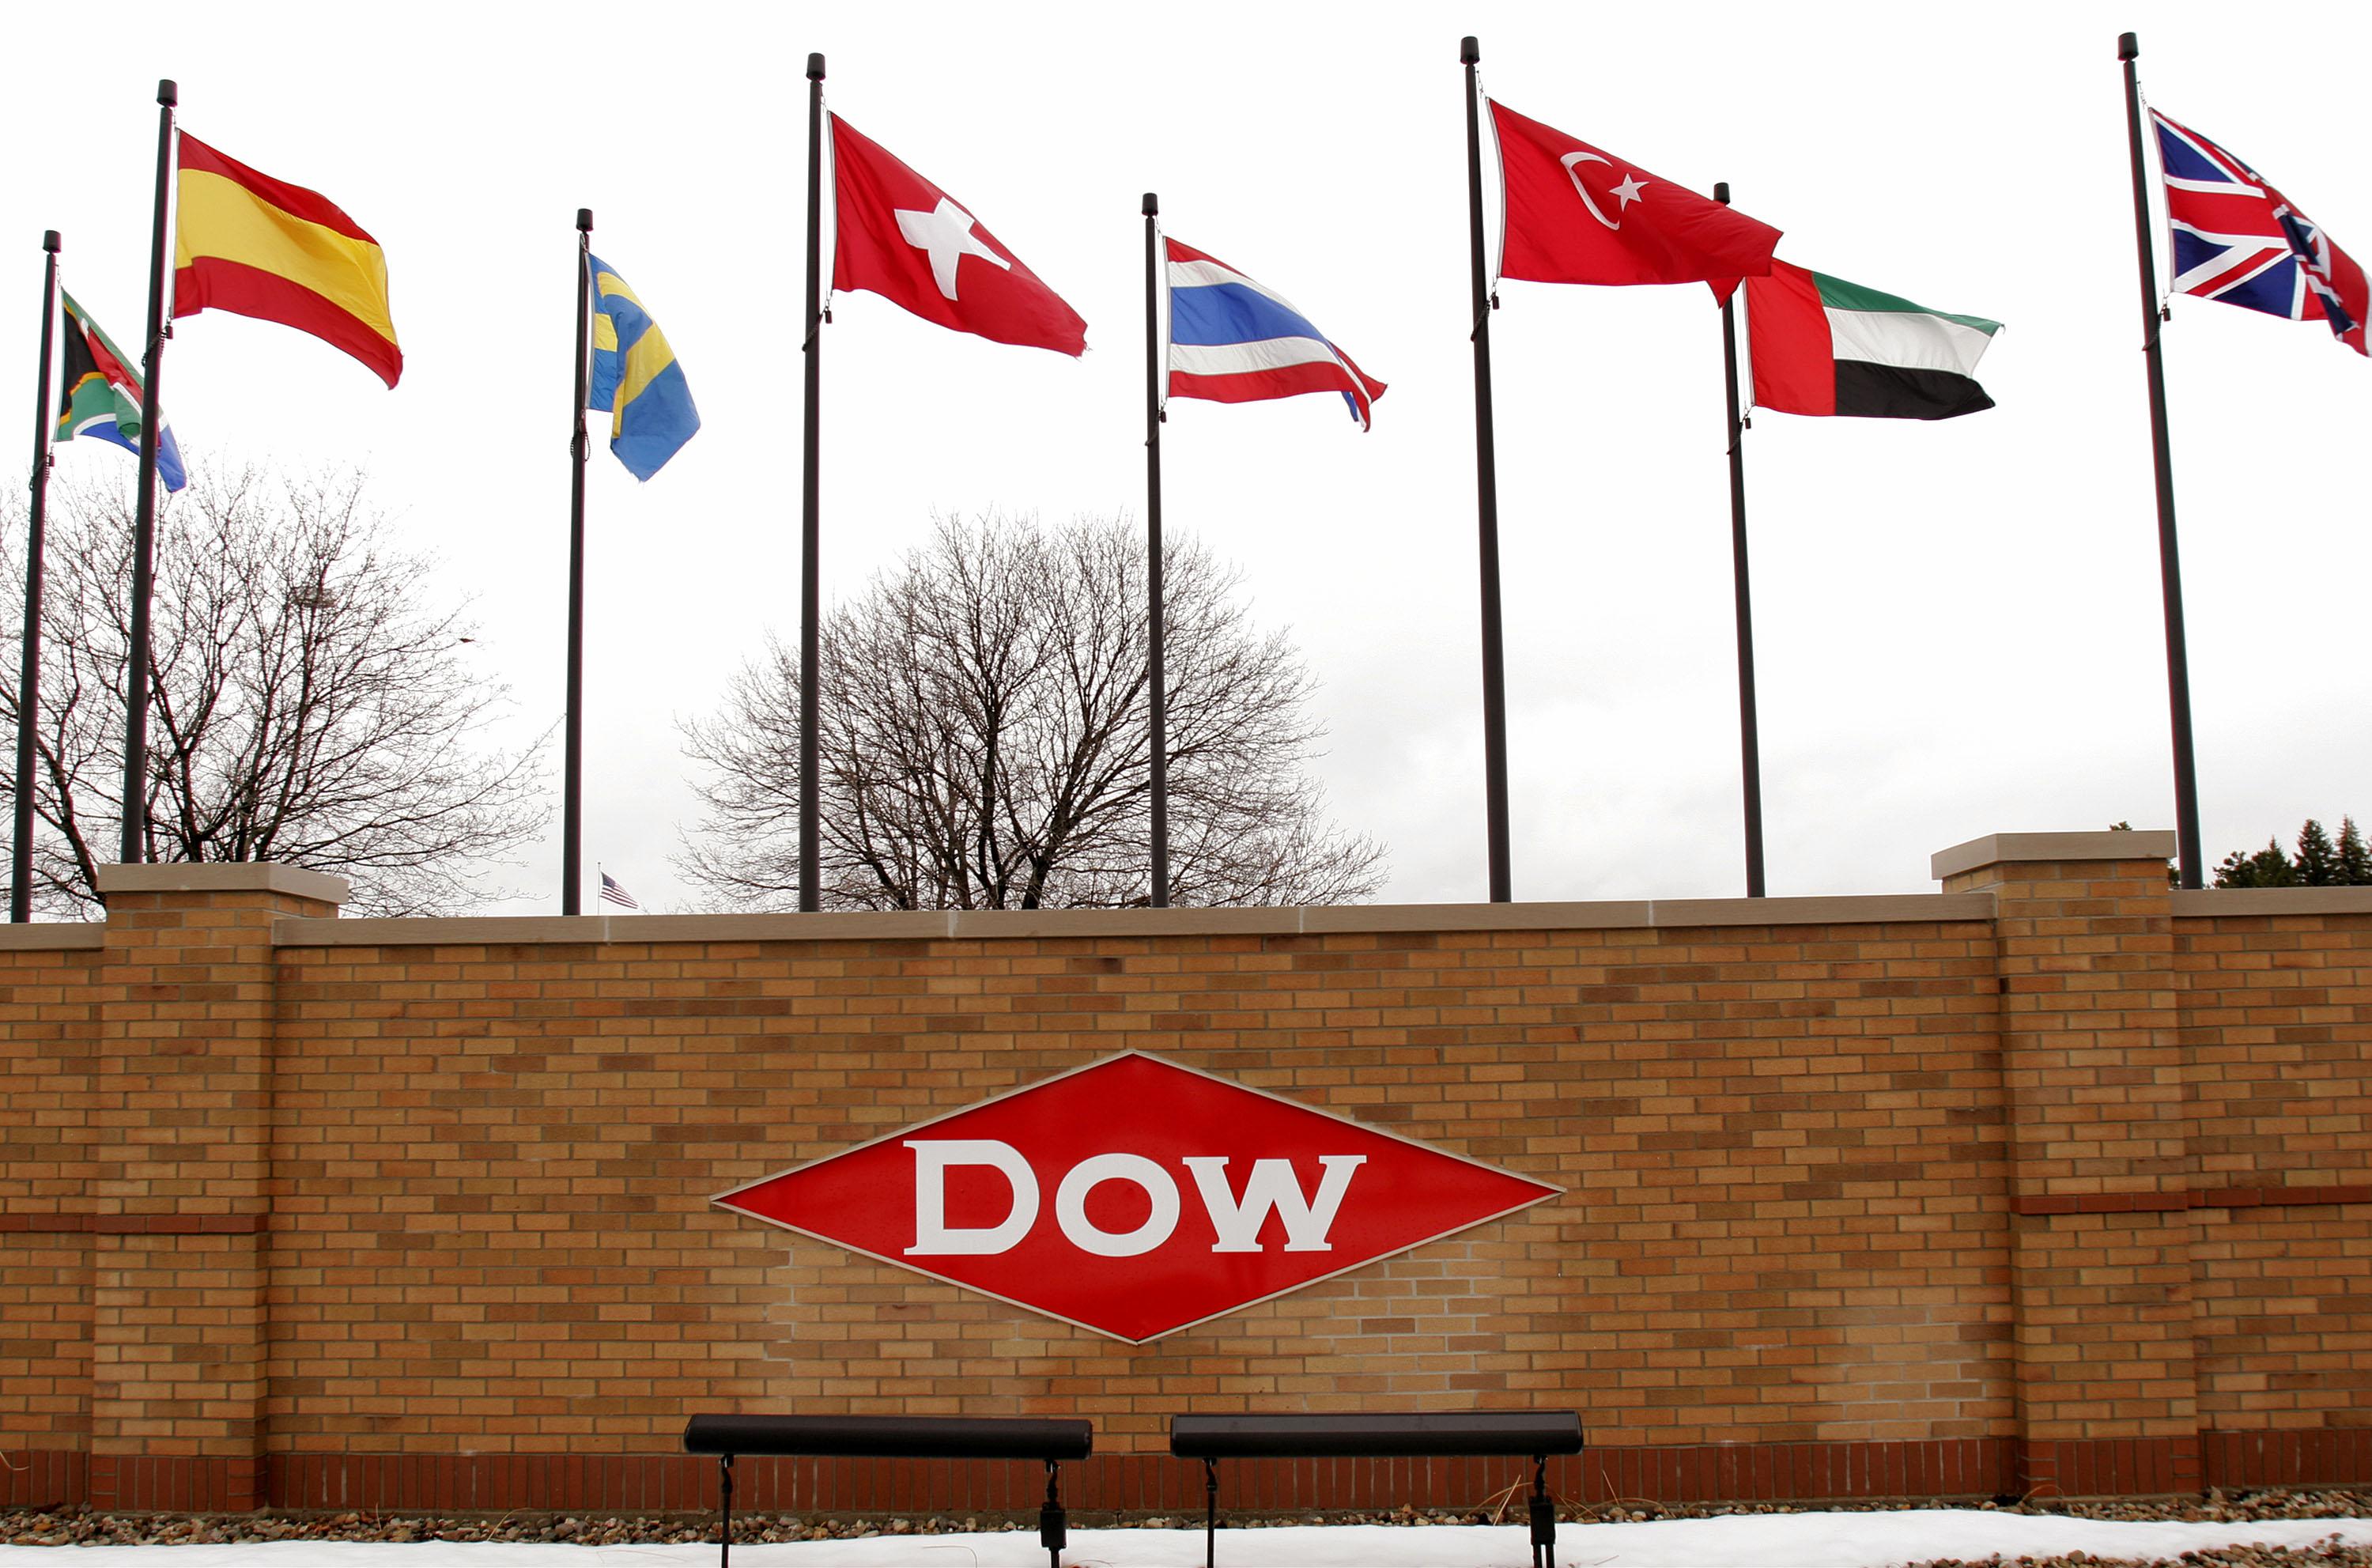 A brick entrance to Dow with various flags.